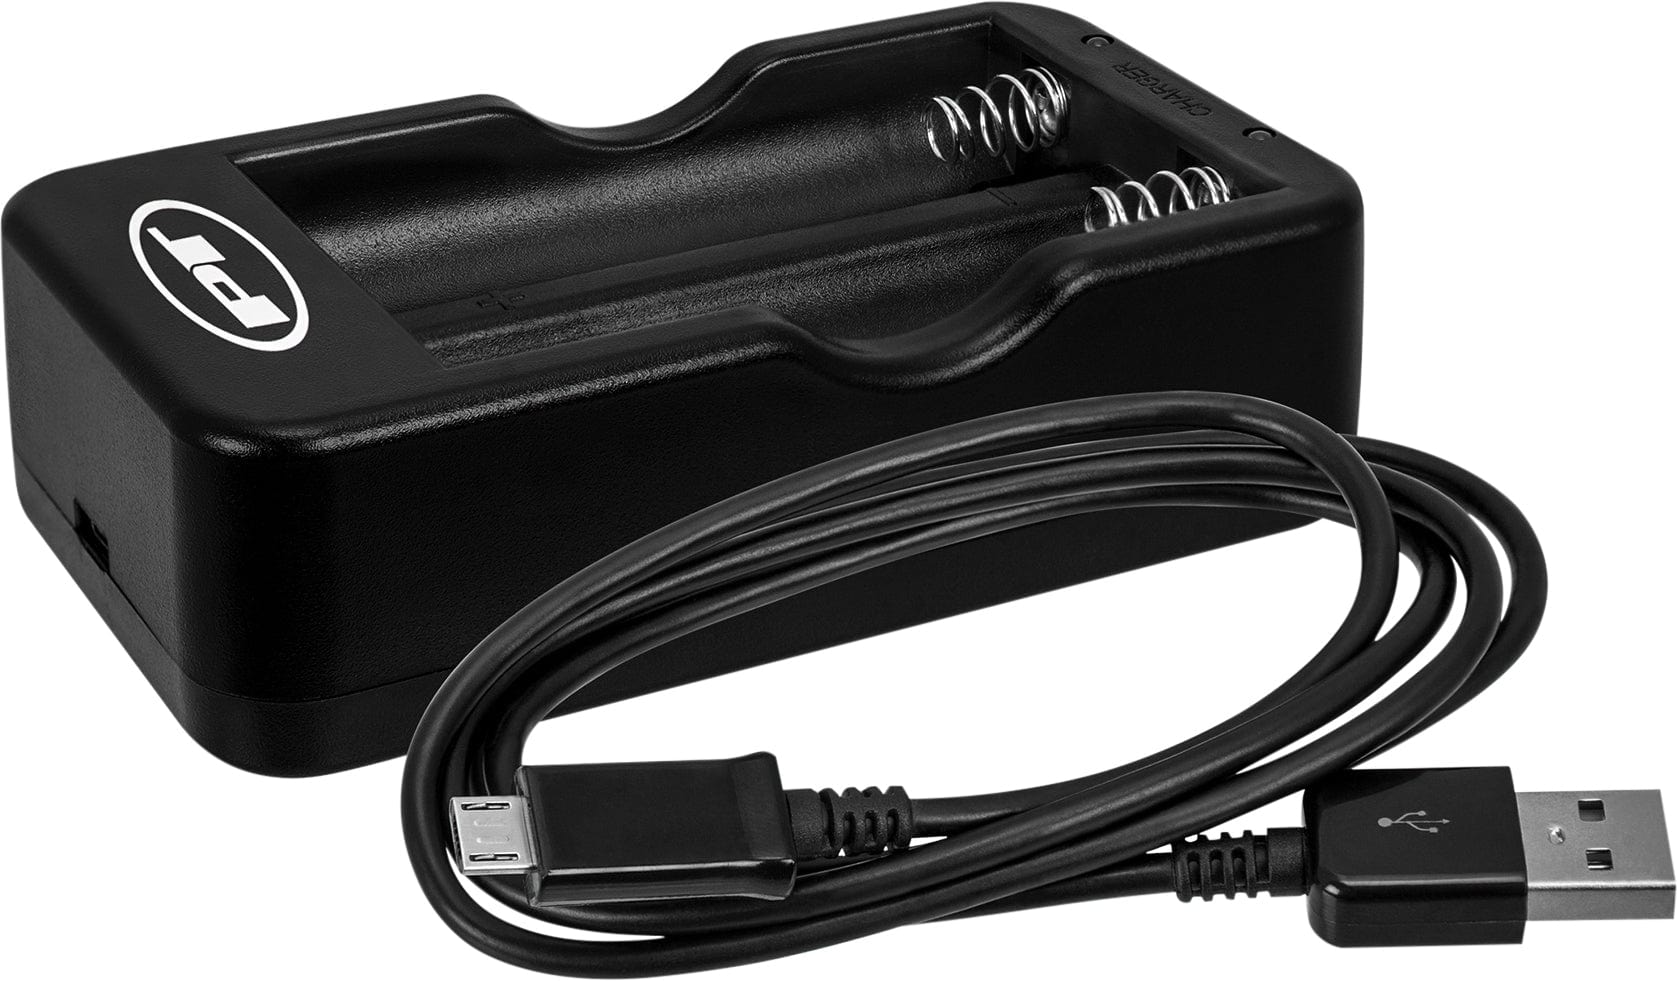 Western Powersports Battery Charger Dual Battery Charger 18650 3.7 Volt by Performance Tool W2655C